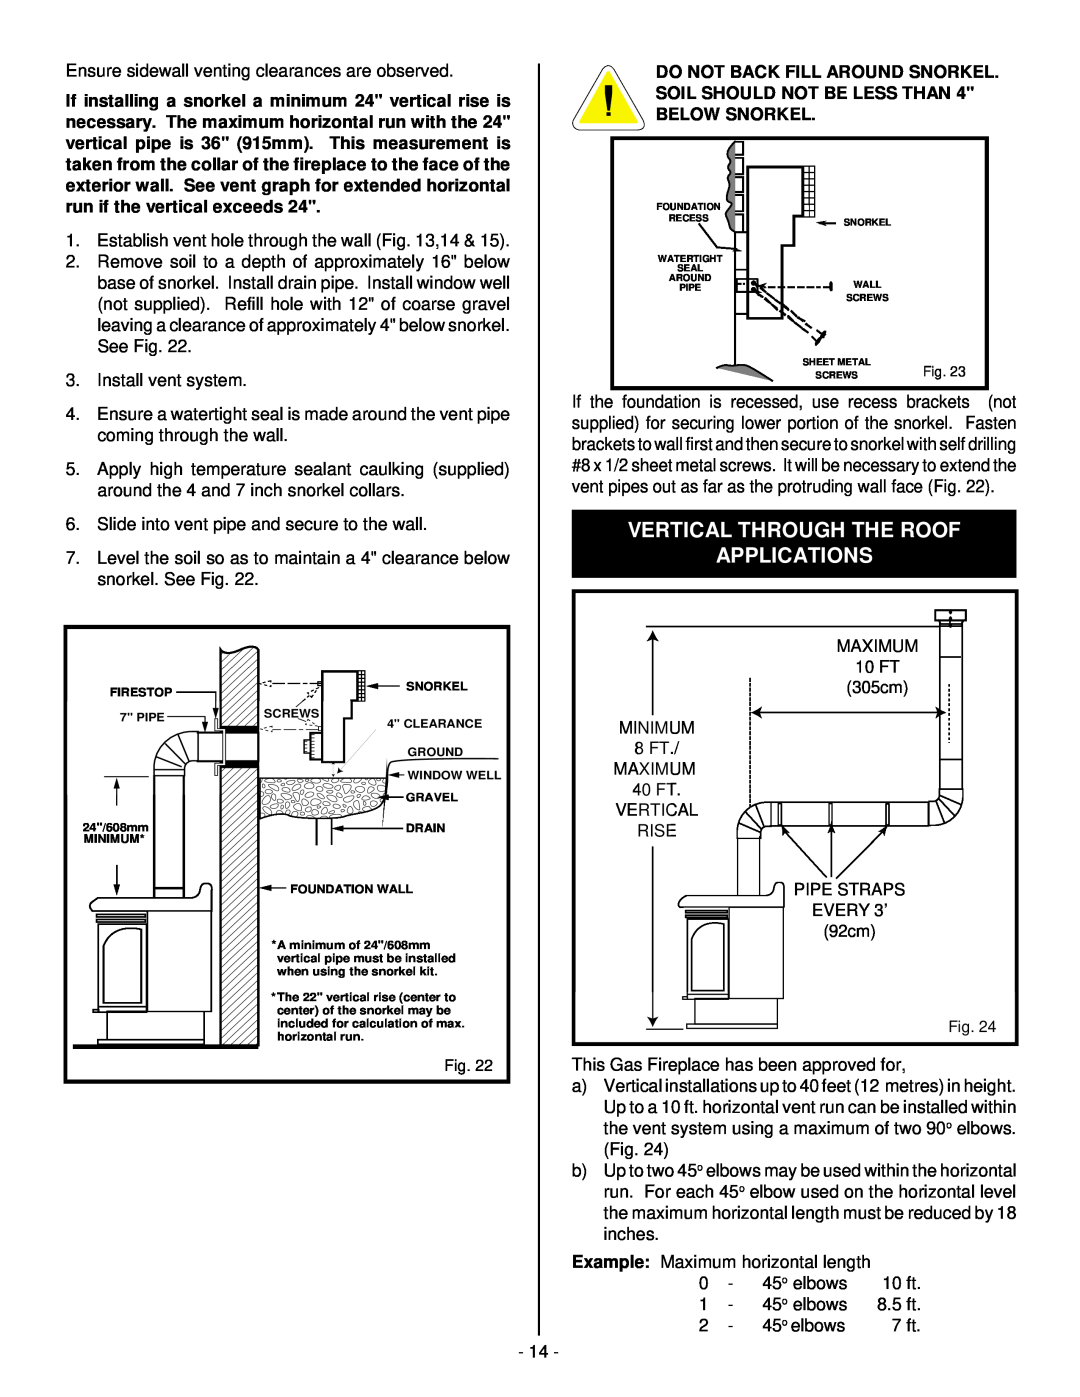 Vermont Casting D232 installation instructions Vertical Through The Roof Applications, run if the vertical exceeds 